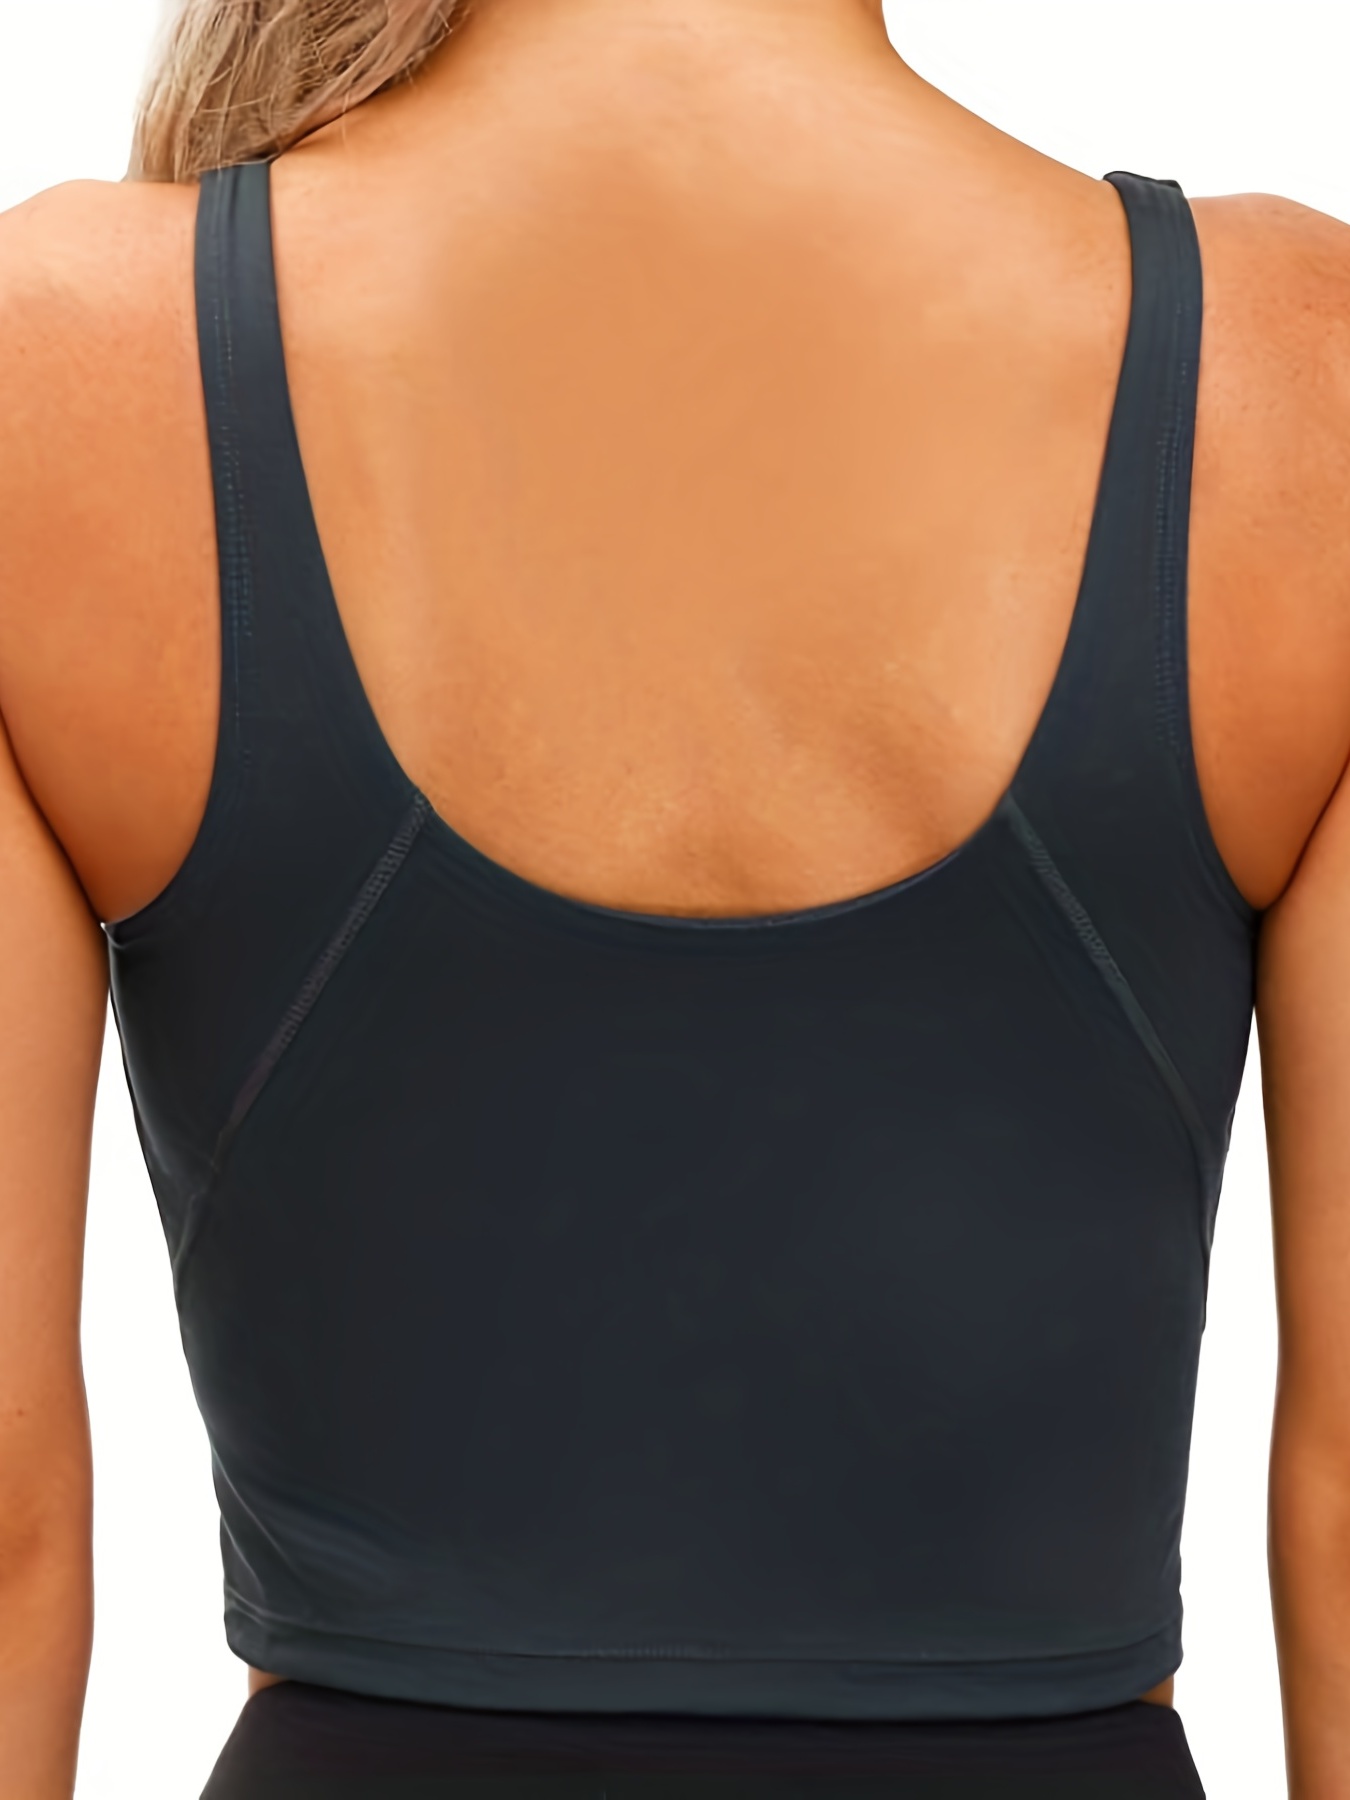 THE GYM PEOPLE Women's Medium Support Sports Bra Removable Padded  Sleeveless Workout Crop Tops Black at  Women's Clothing store